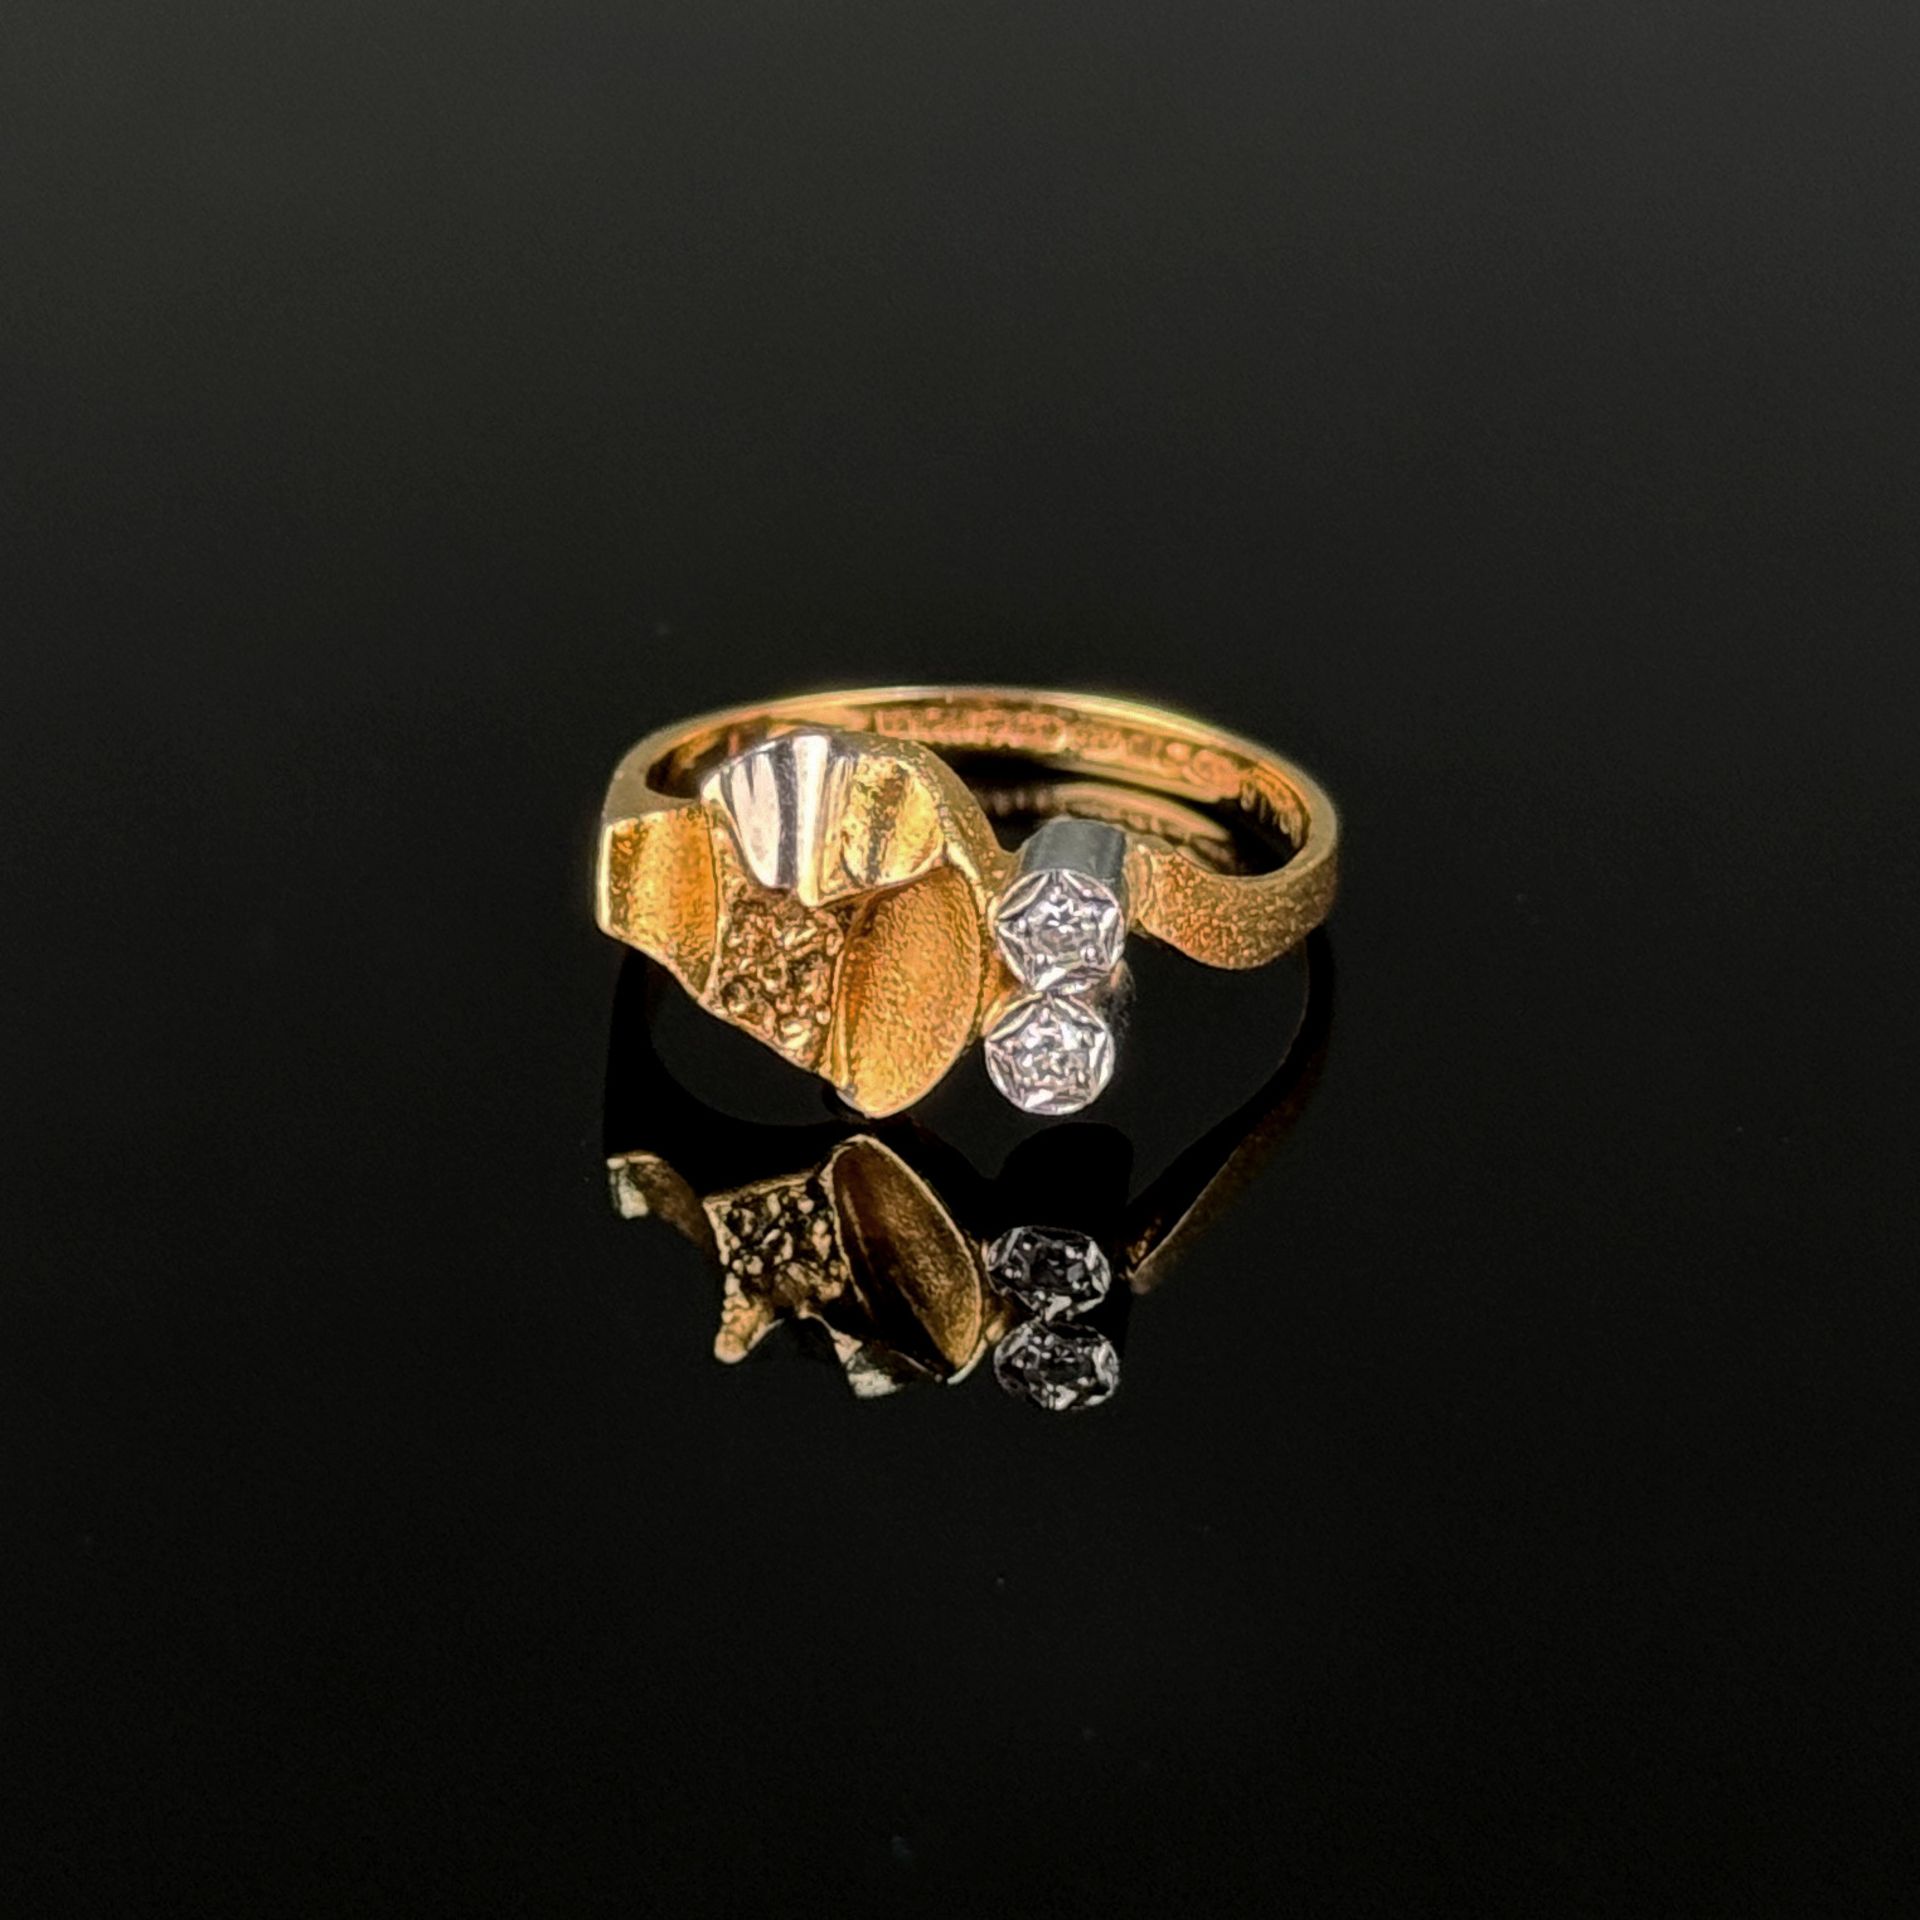 Modern Lapponia diamond ring, 750/18K yellow gold (hallmarked), 3.37 g, set with 2 brilliant-cut di - Image 2 of 3